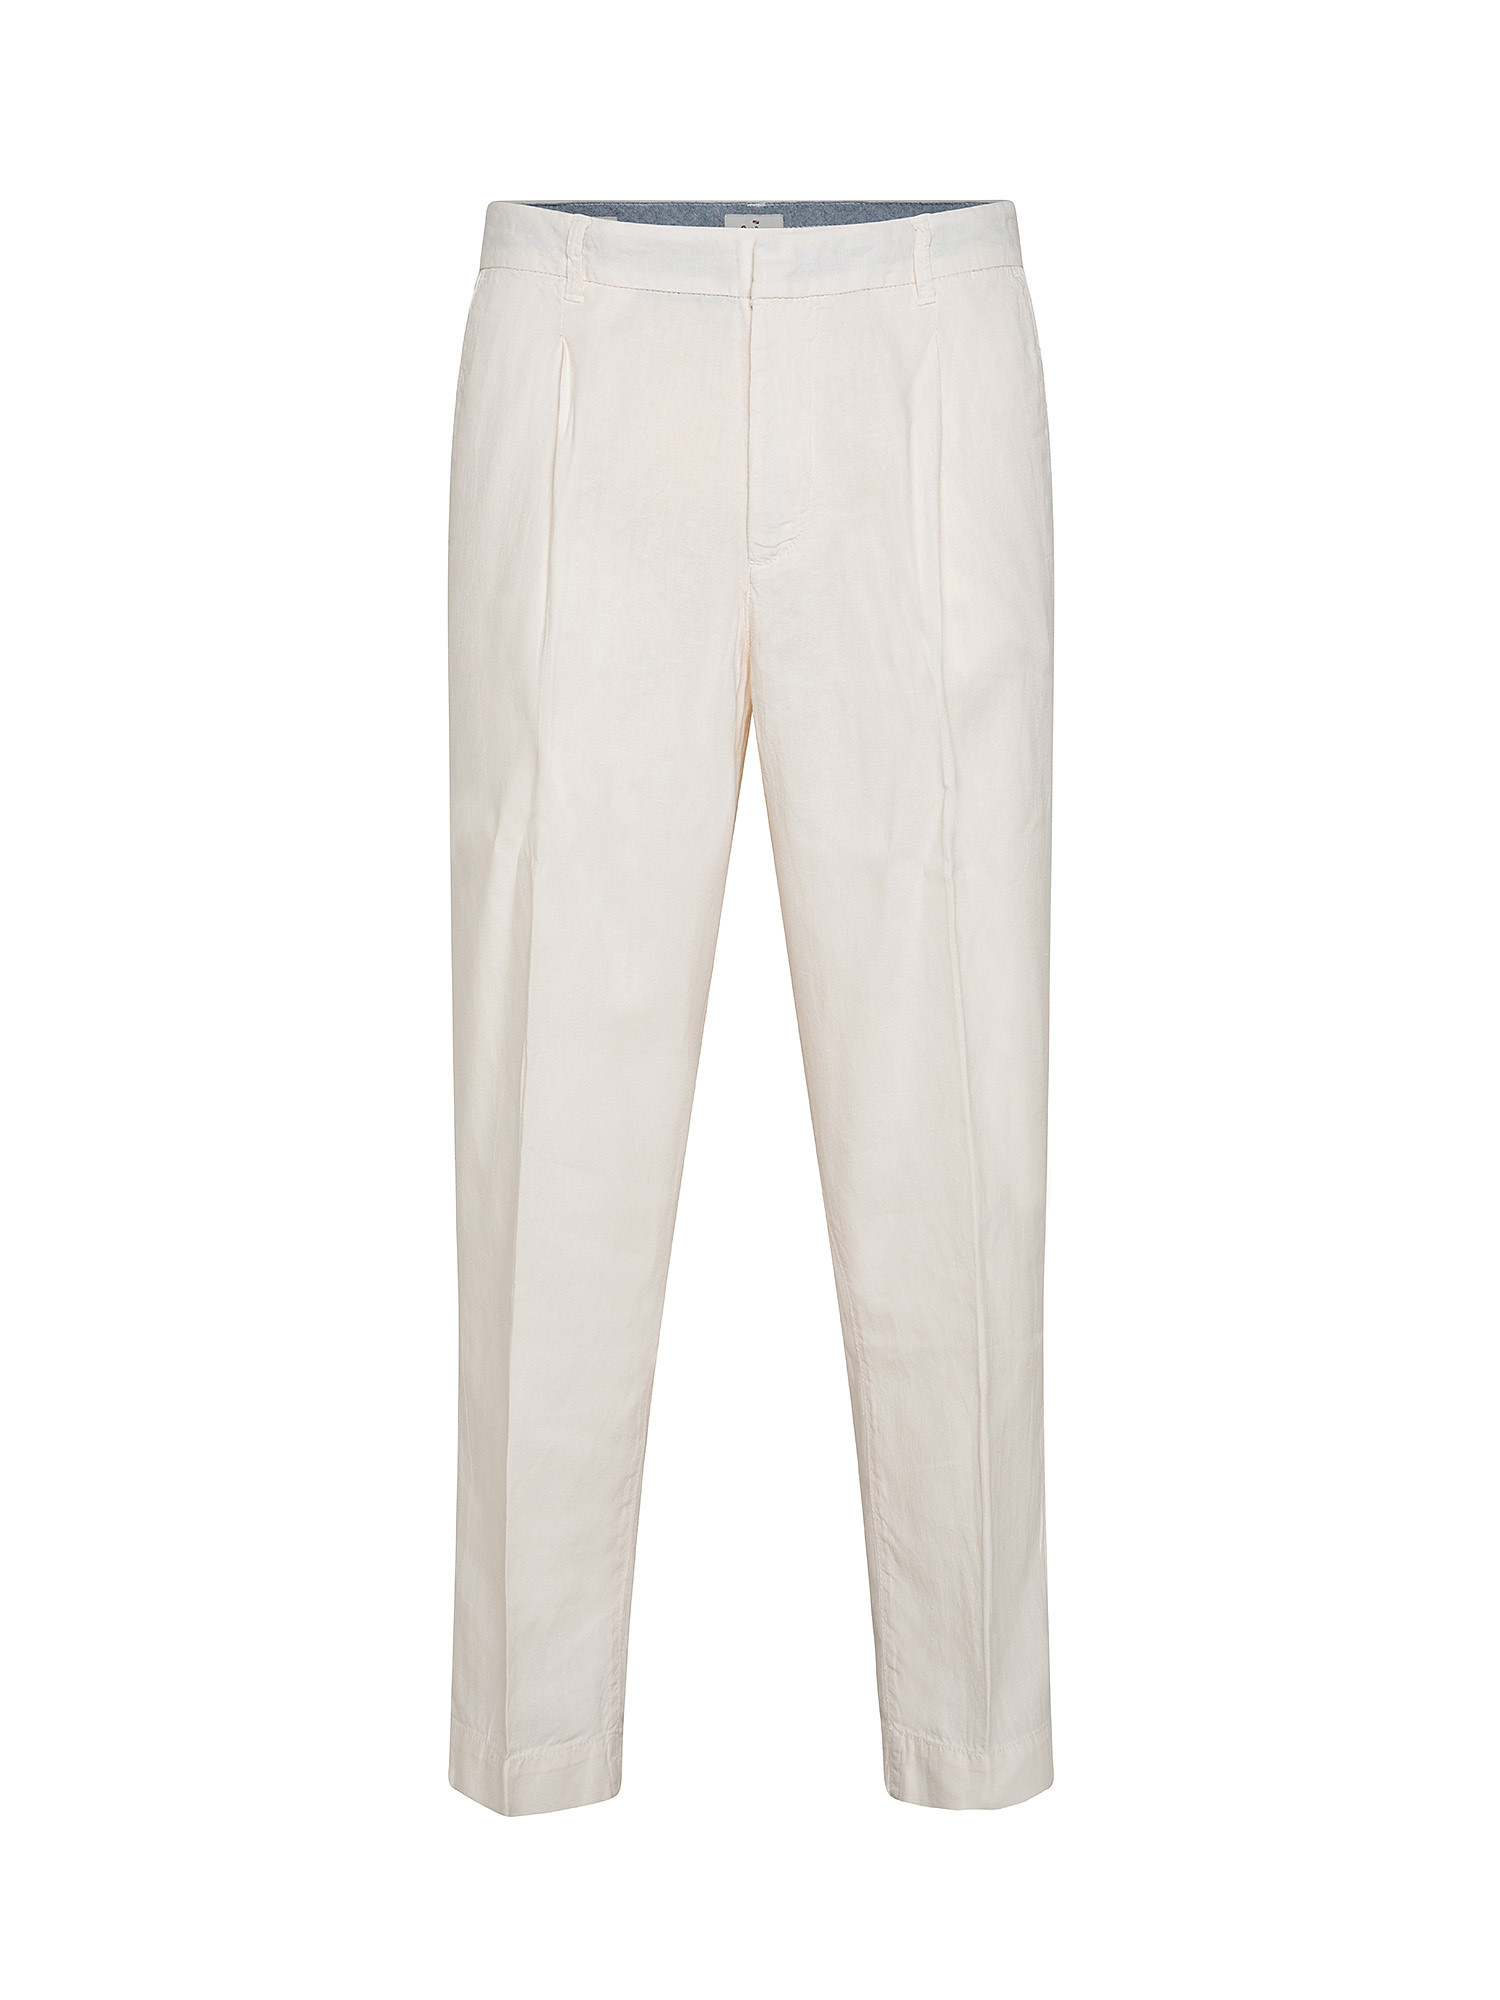 Linen blend trousers, White Cream, large image number 0